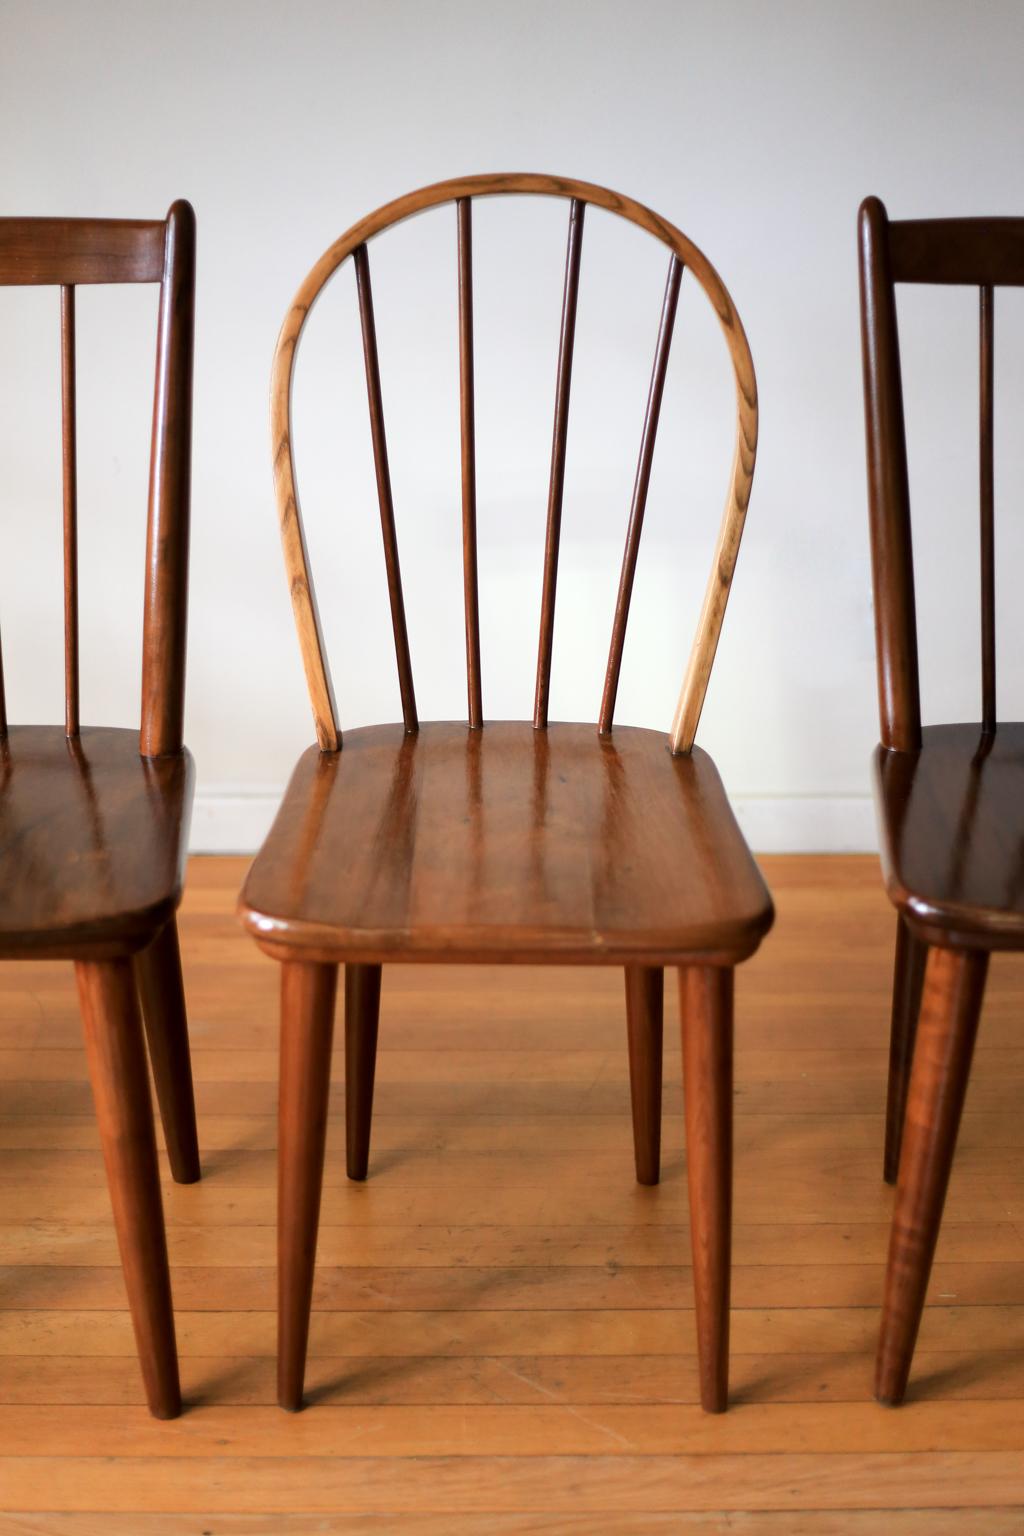 Two Bow-Back Windsor Chairs by E.E. Meyer for Binnehuis, South Africa For Sale 1